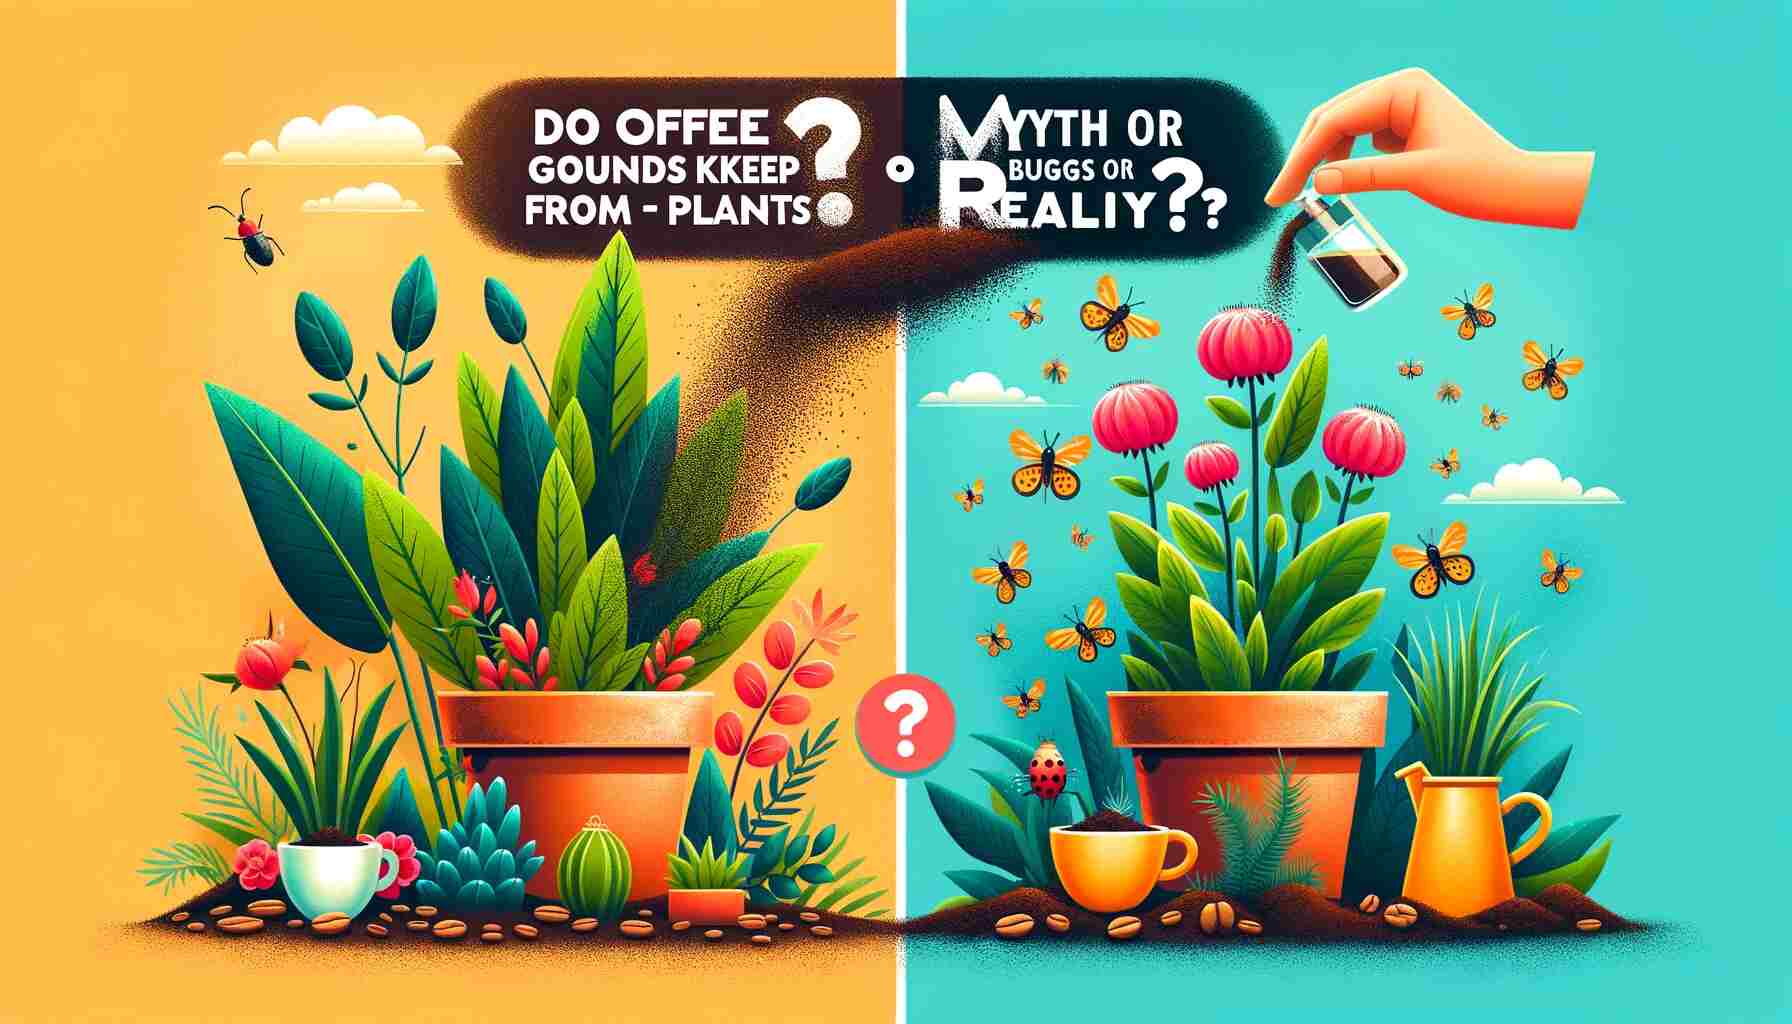 An illustrative image for the article Do Coffee Grounds Keep Bugs Away from Plants: Myth or Reality, showing a vibrant garden scene divided into two sections. On the left, healthy plants are surrounded by coffee grounds at their base, with no bugs visible. On the right, plants without coffee grounds are infested with bugs. A large question mark symbol hovers over the scene, highlighting the theme of the article.